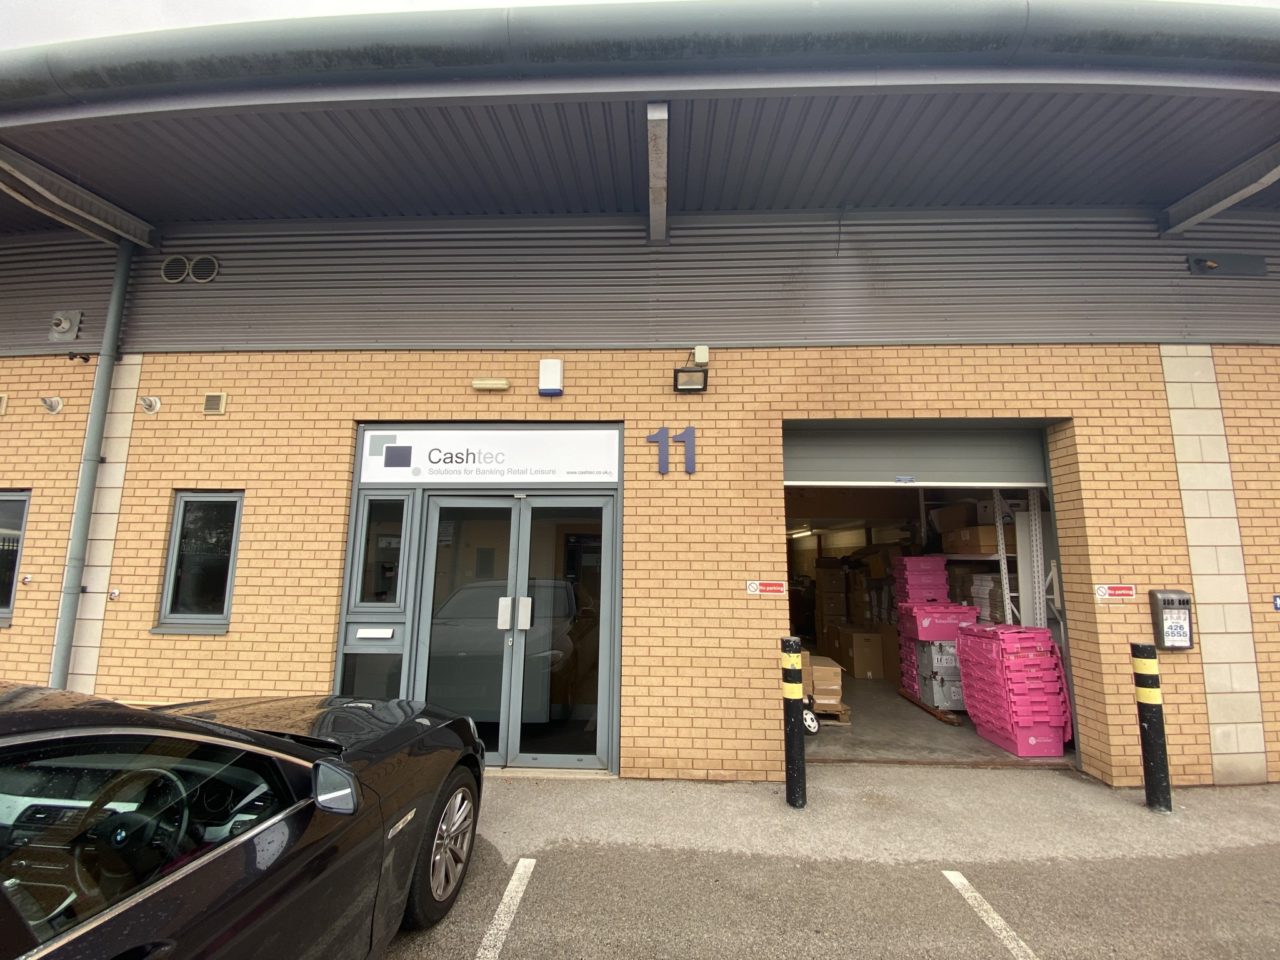 Office & Warehouse Unit to let in Prescot Business Park, L34 - The